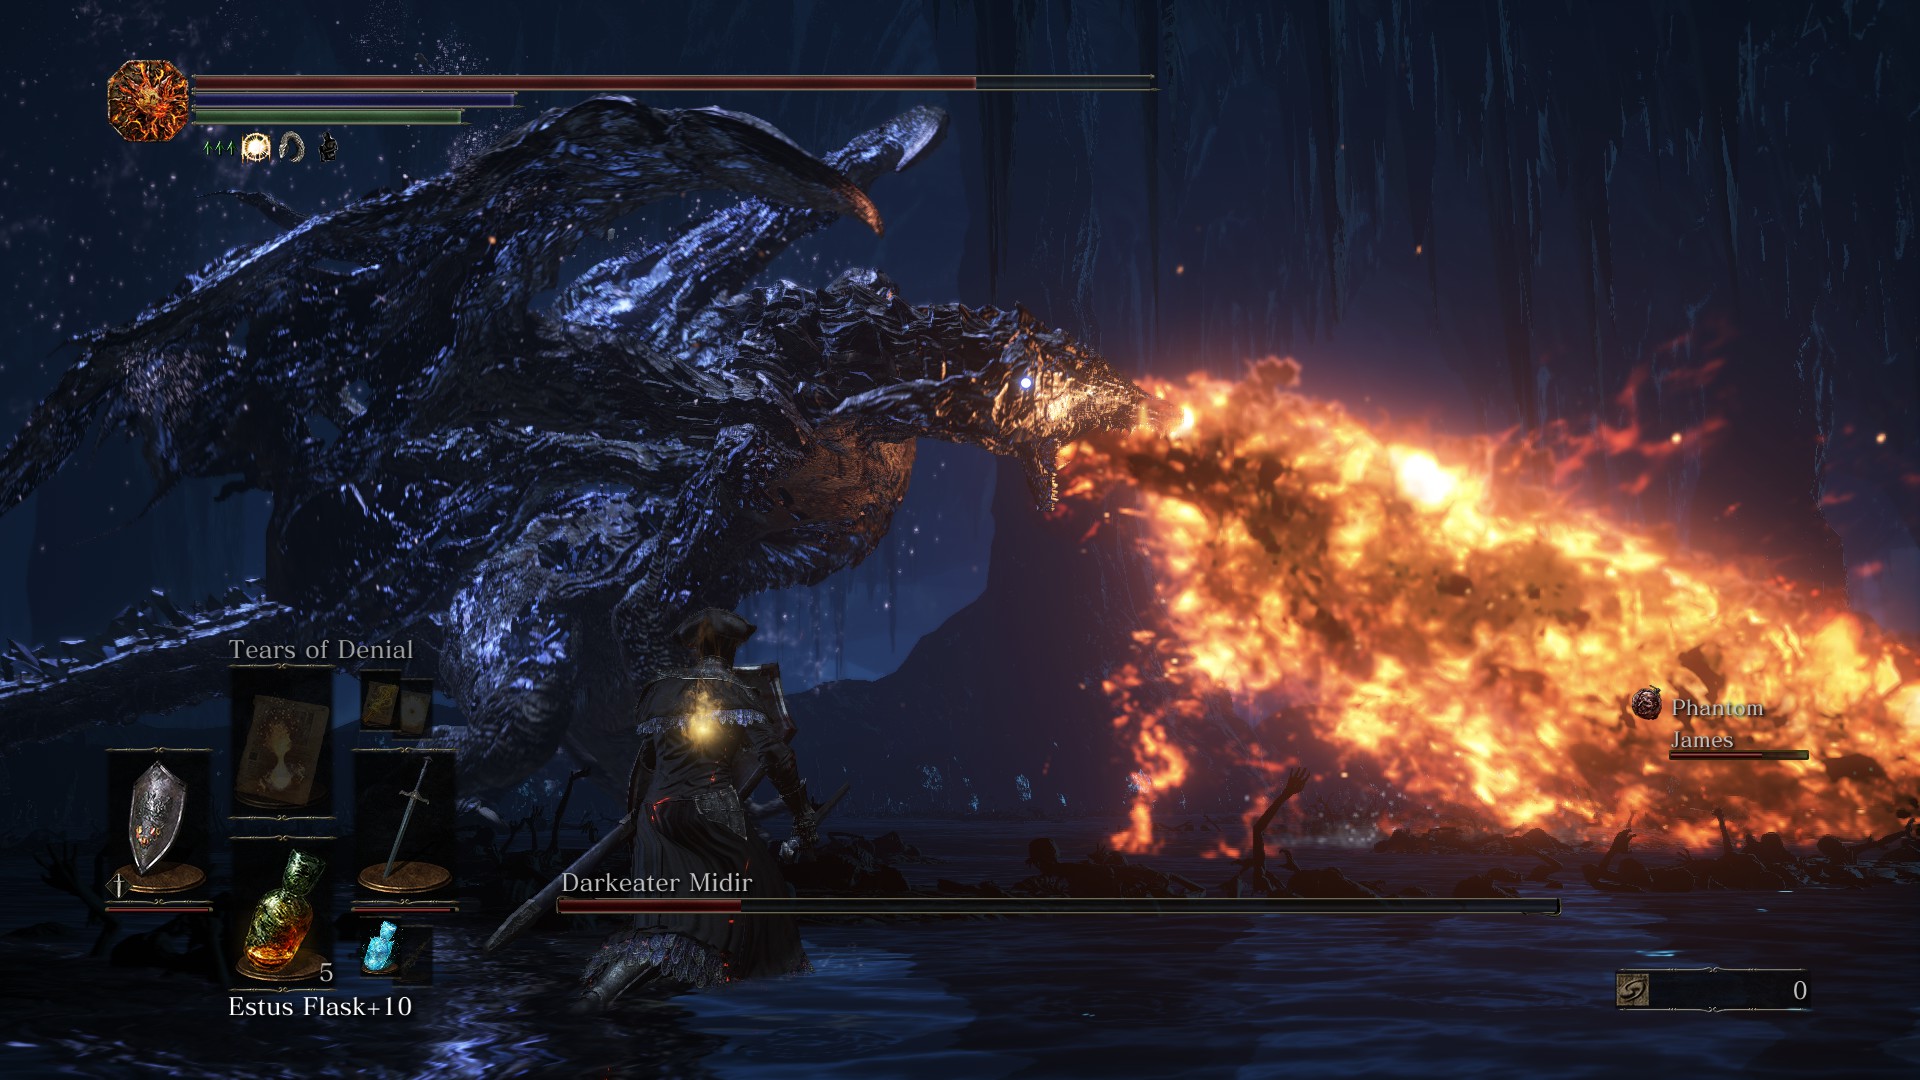 Dark Souls 3 Guide How to Beat Darkeater Midir and Join the Spears of the Church covenant